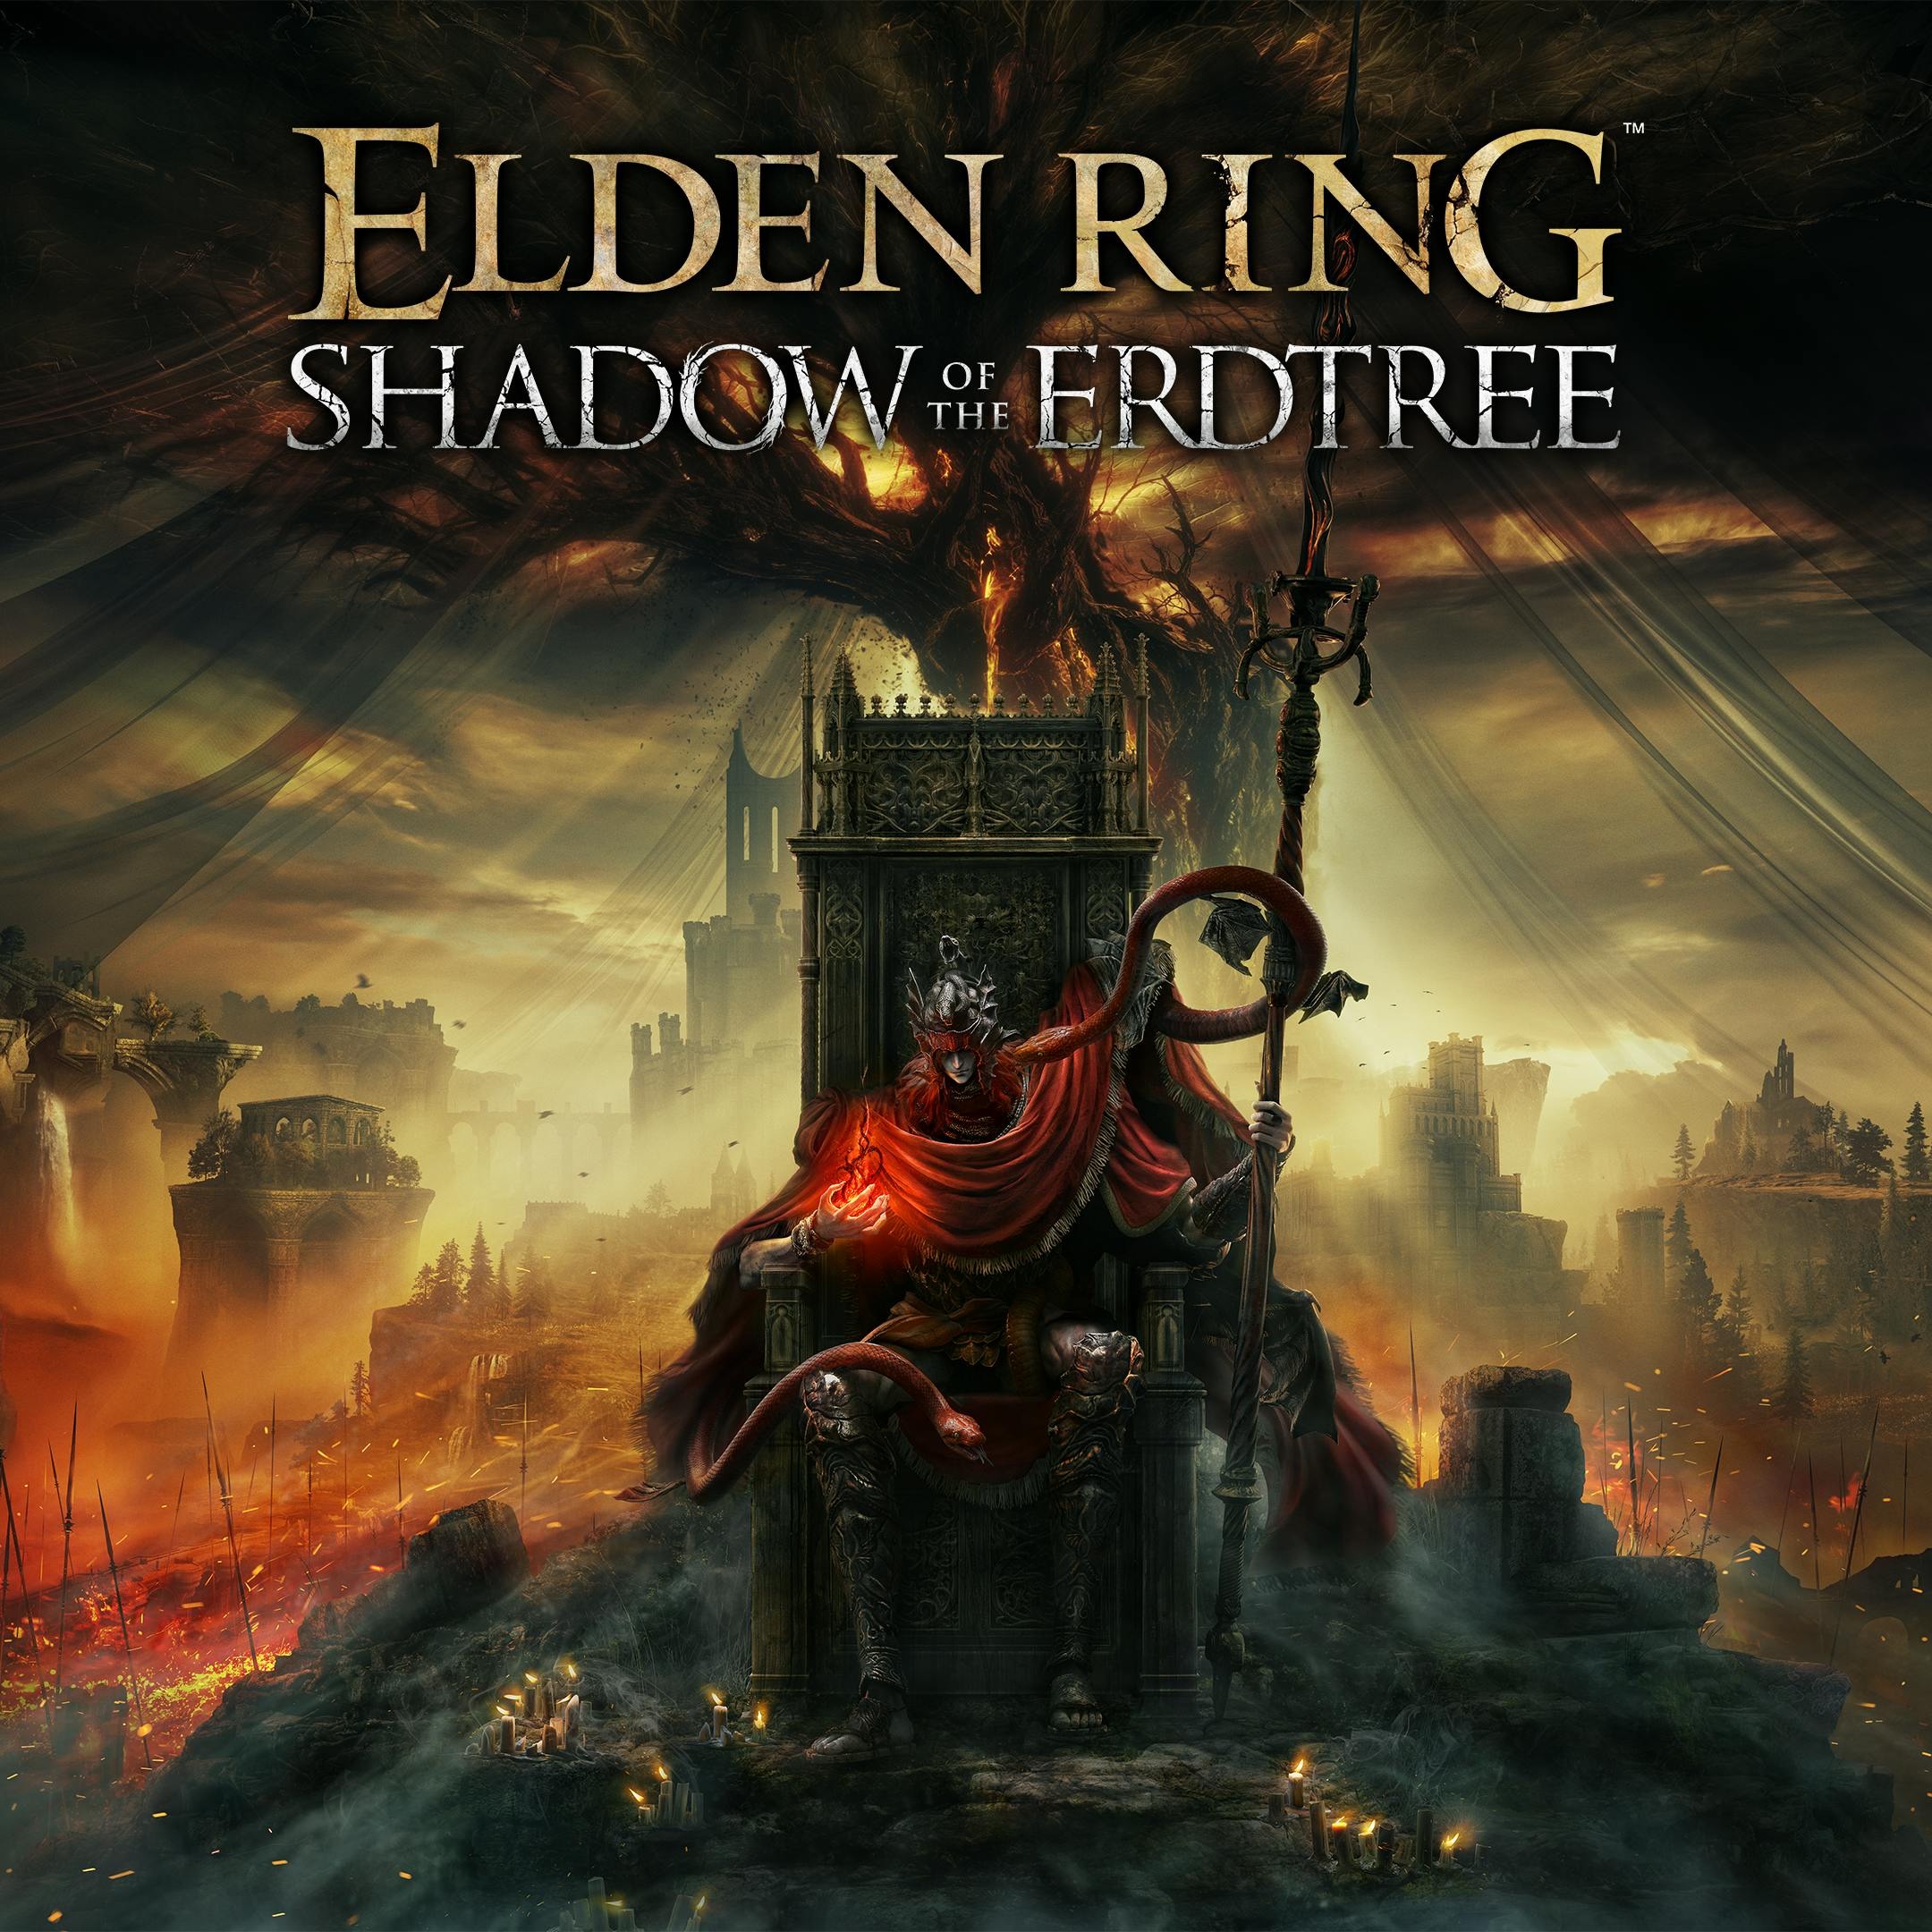 Elden Ring: Shadow of the Erdtree DLC Pre-Purchase (PC Digital Download) $35.19